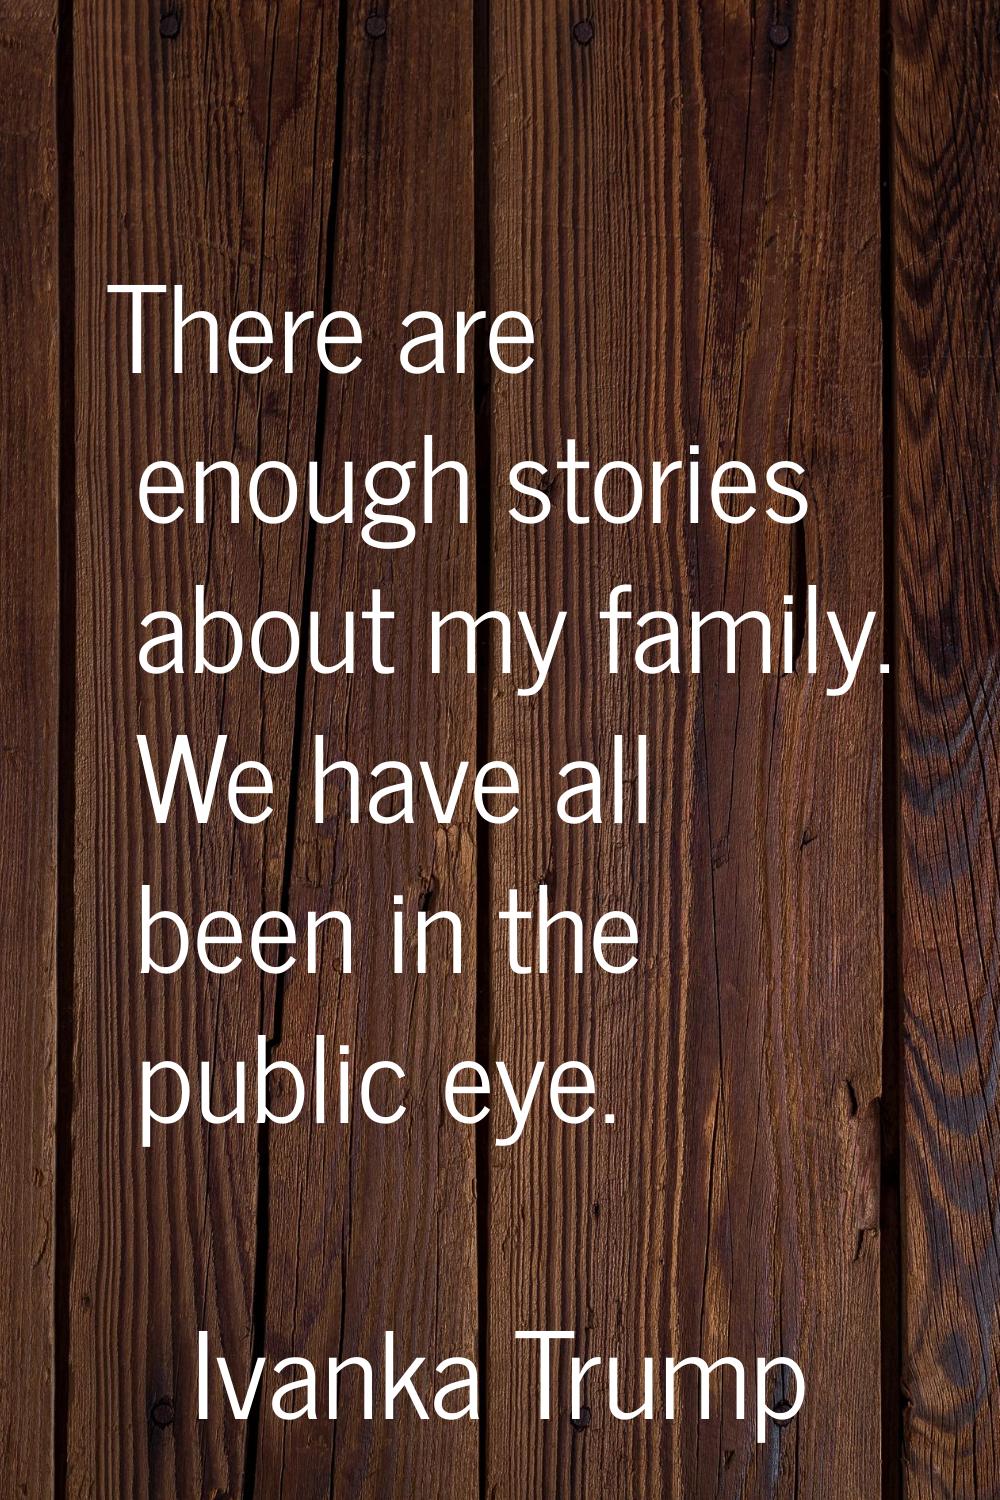 There are enough stories about my family. We have all been in the public eye.